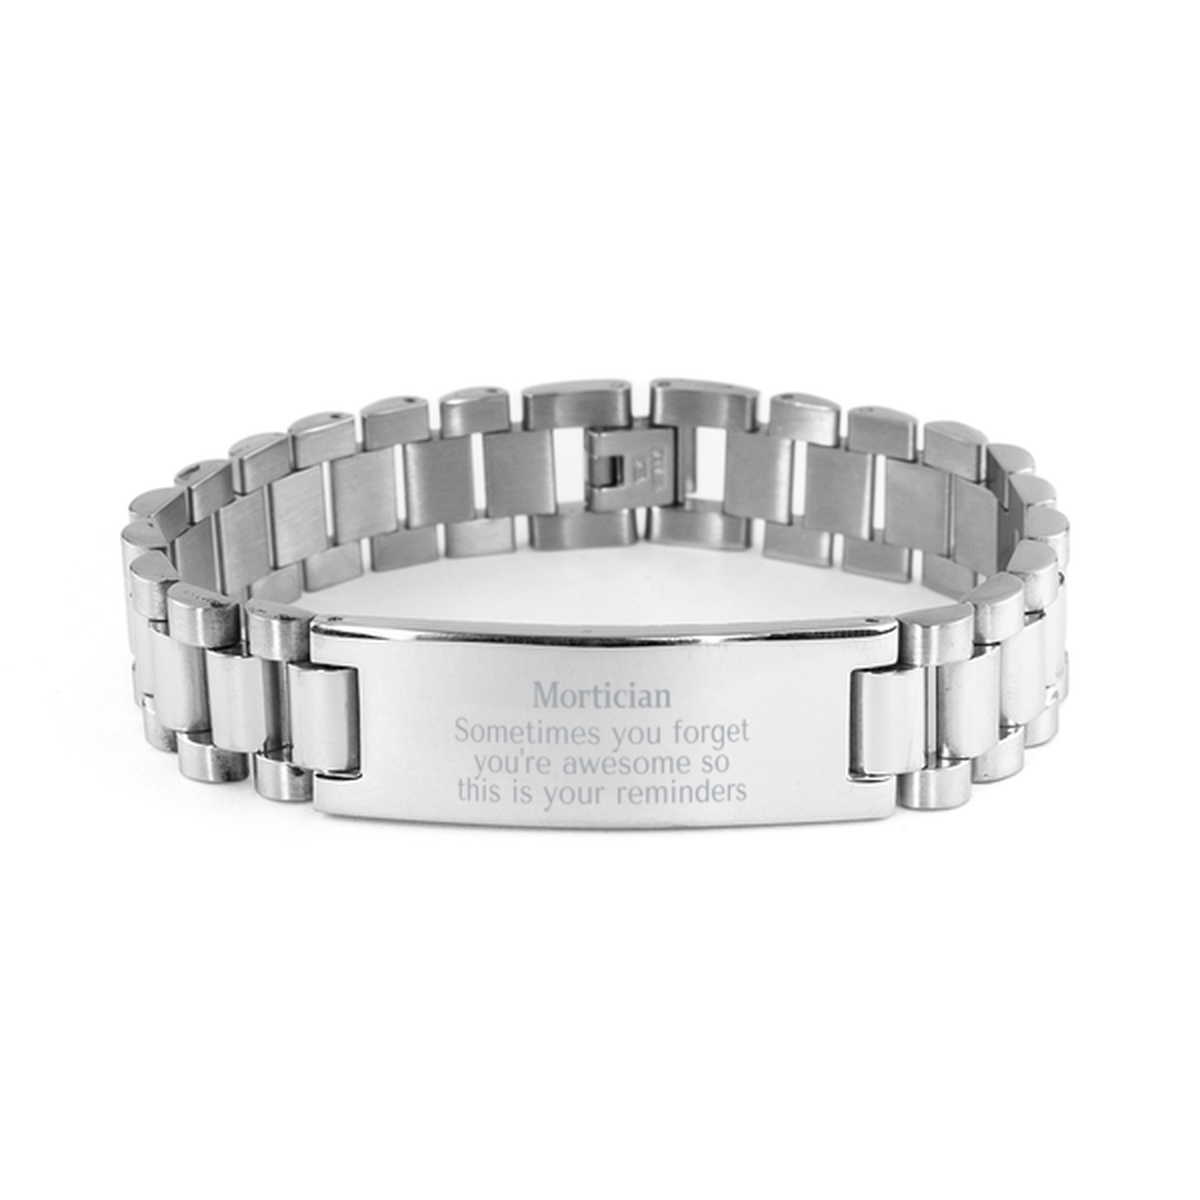 Sentimental Mortician Ladder Stainless Steel Bracelet, Mortician Sometimes you forget you're awesome so this is your reminders, Graduation Christmas Birthday Gifts for Mortician, Men, Women, Coworkers